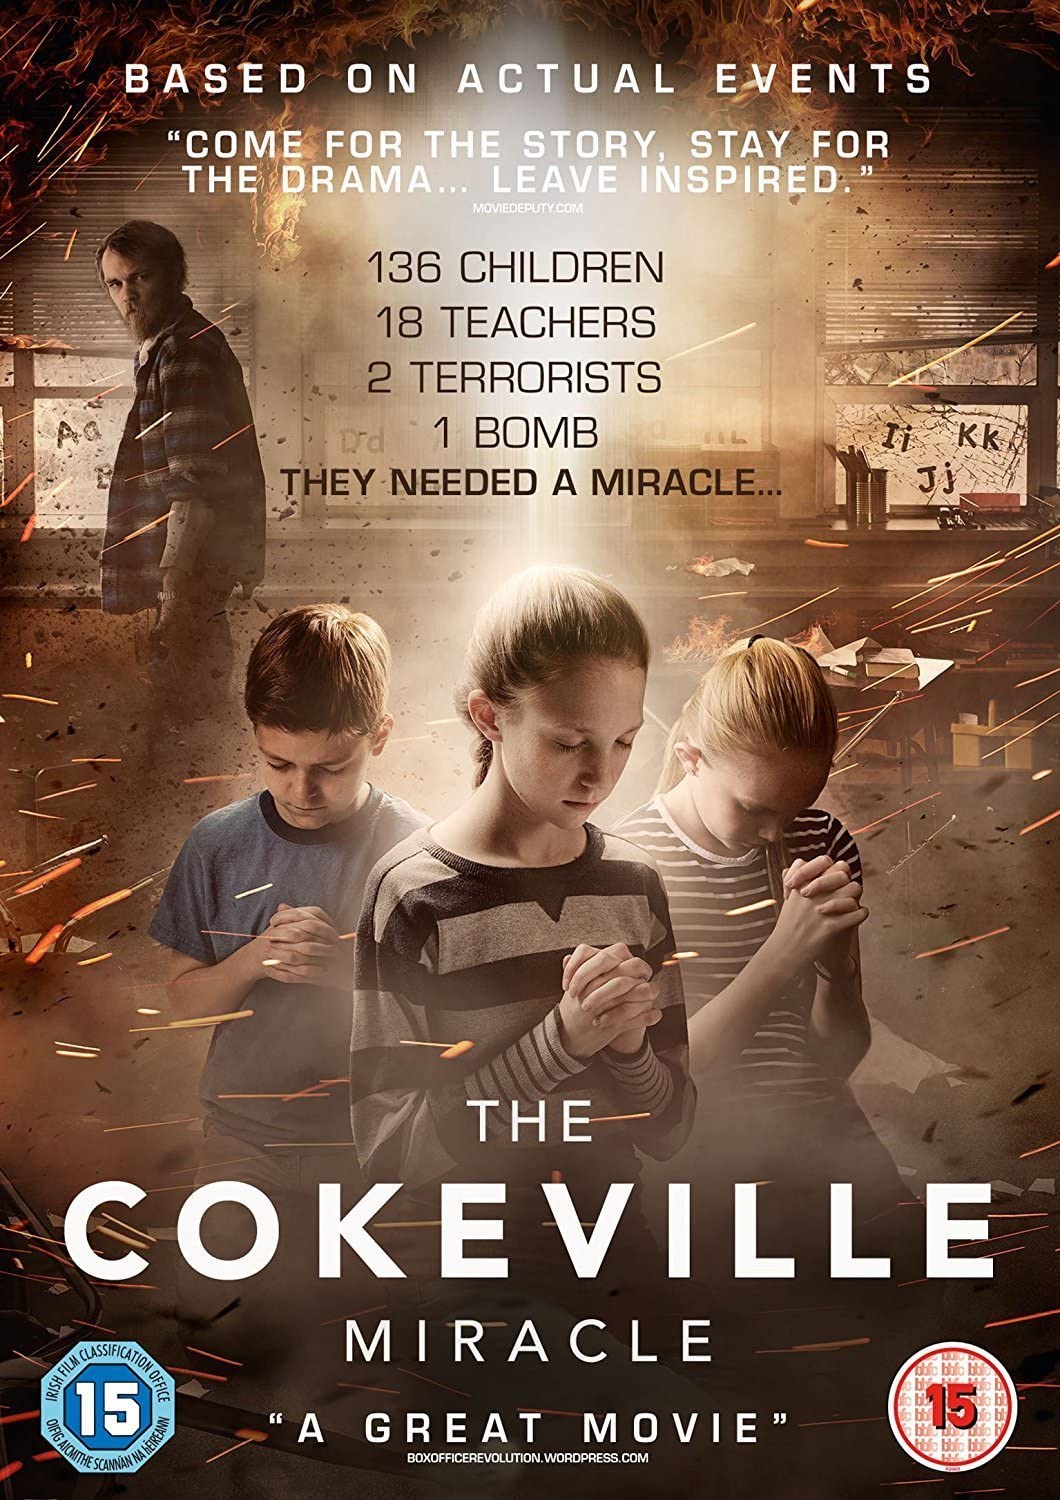 The Cokeville Miracle - Thriller/Drama [DVD]